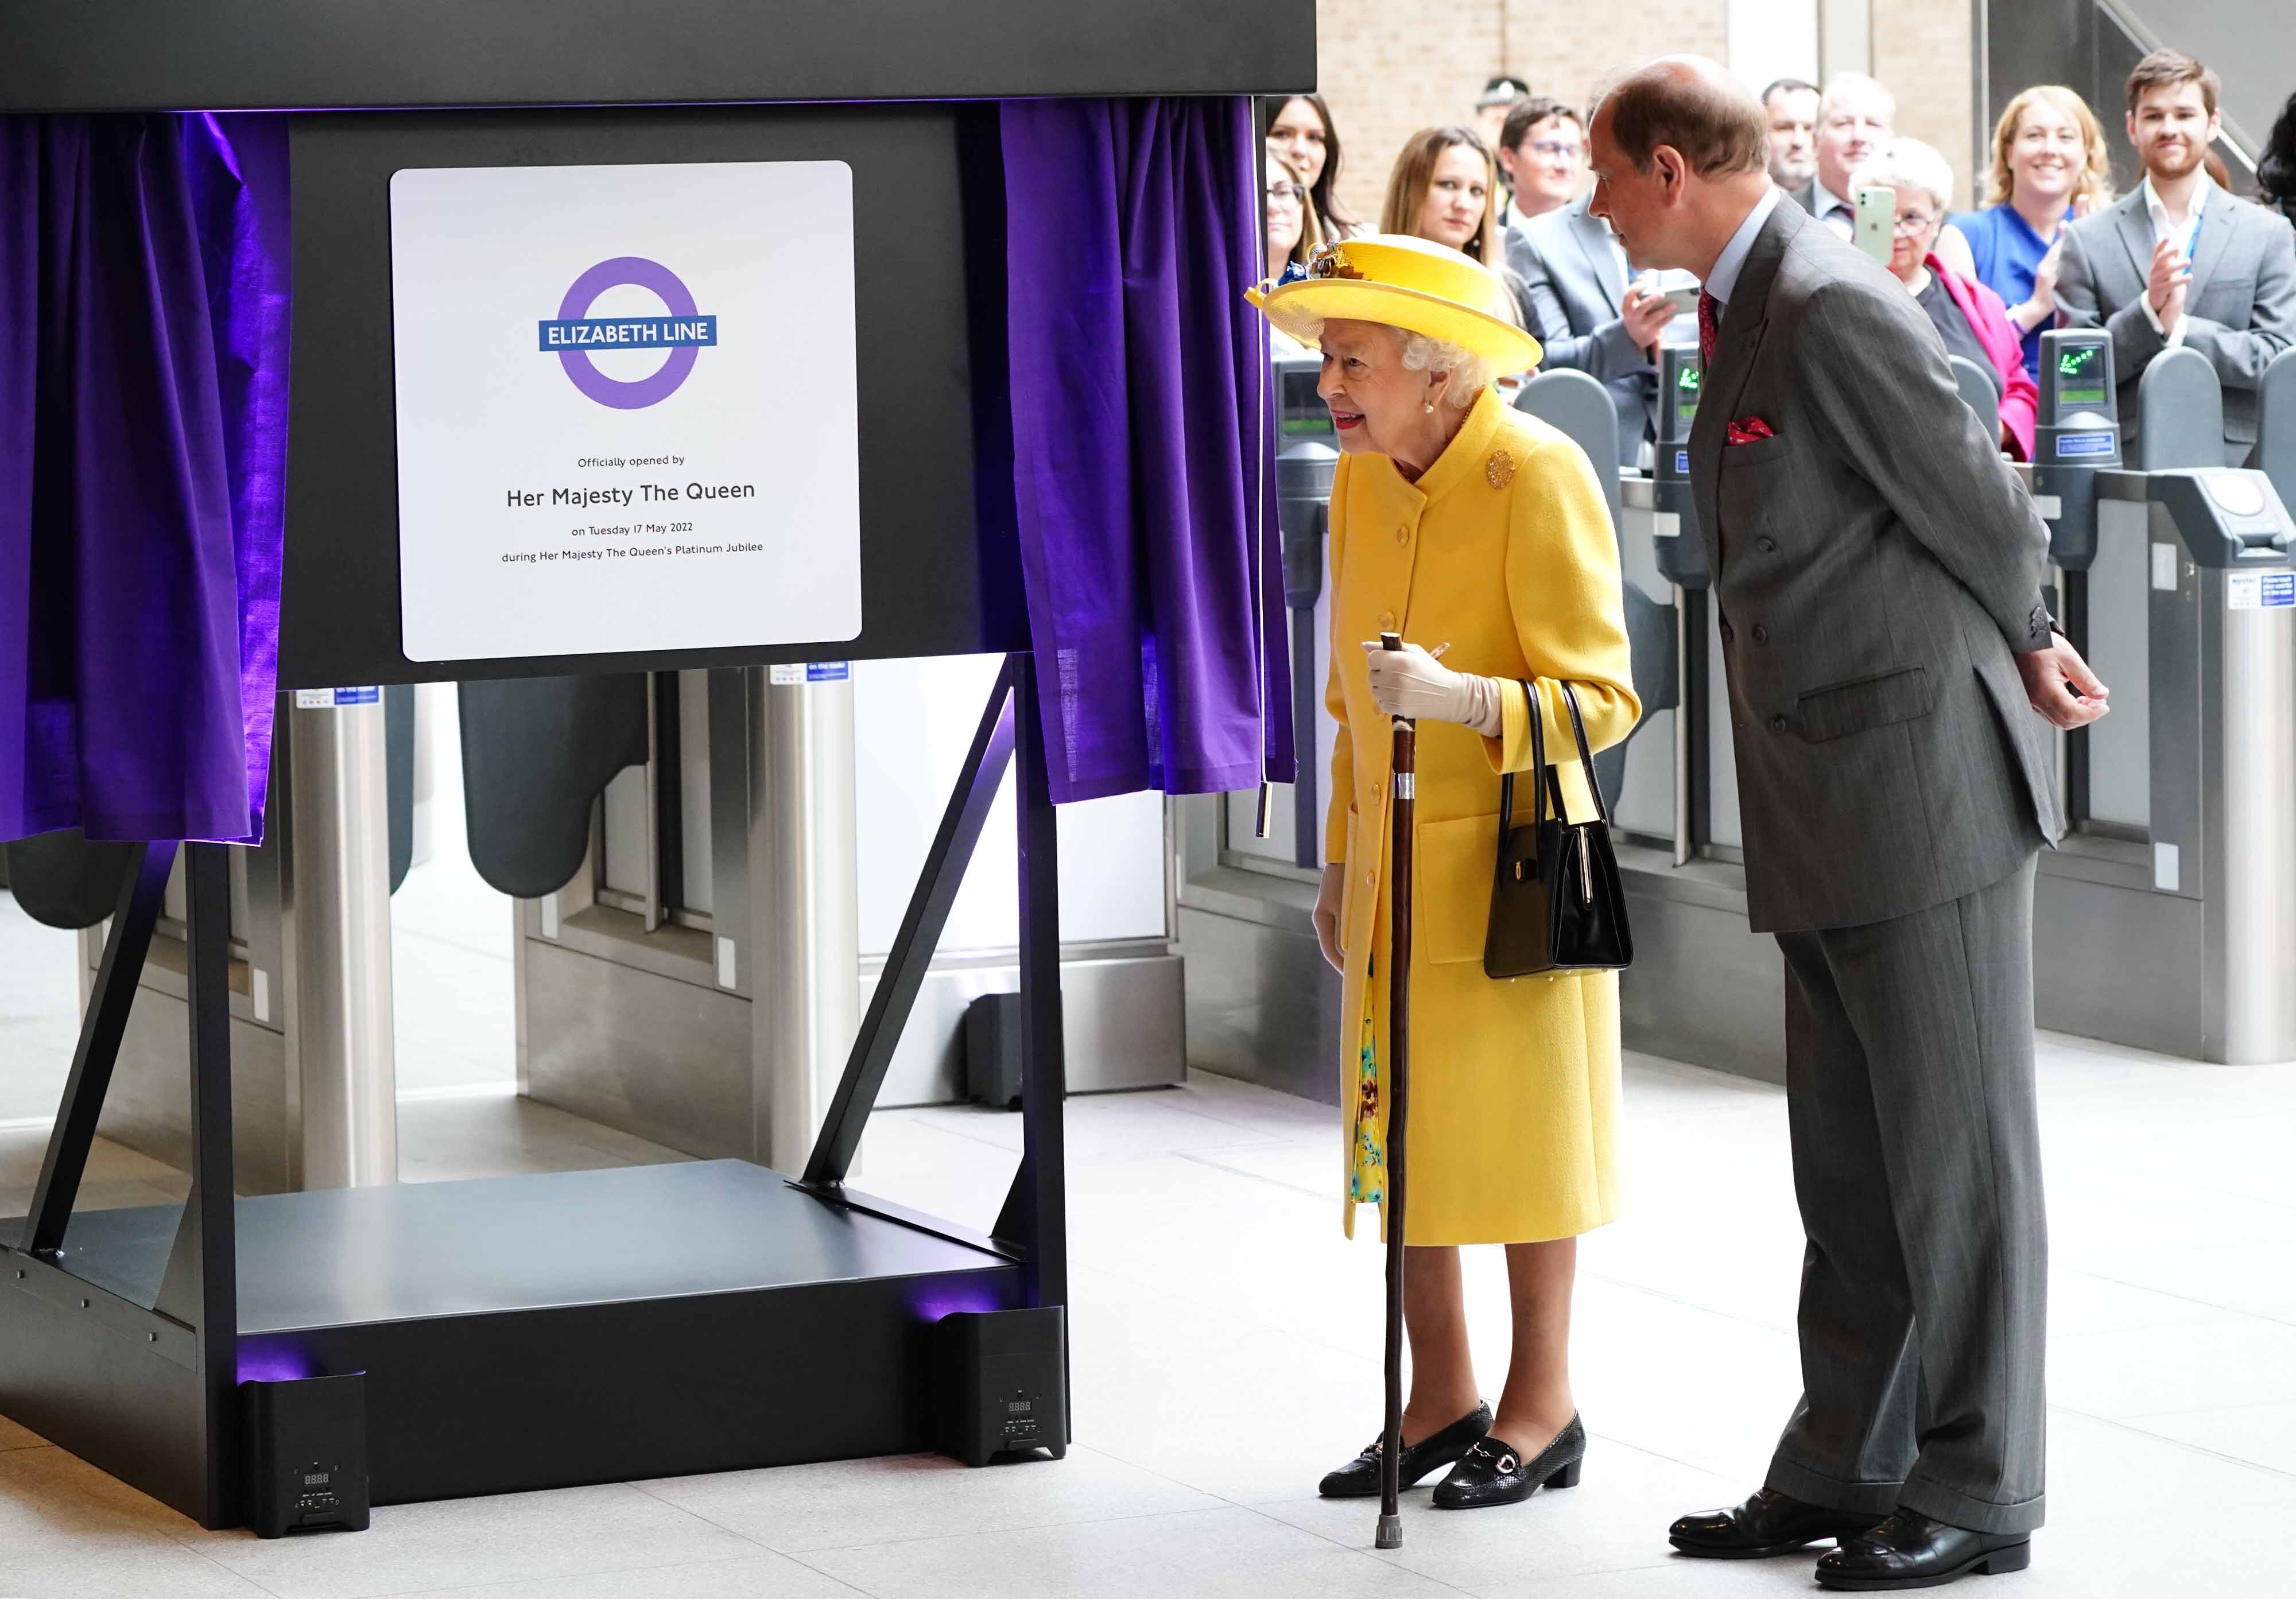 The Queen and the Earl of Wessex unveil a plaque at Paddington station in London, to mark the completion of London’s Crossrail project (Ian West/PA)